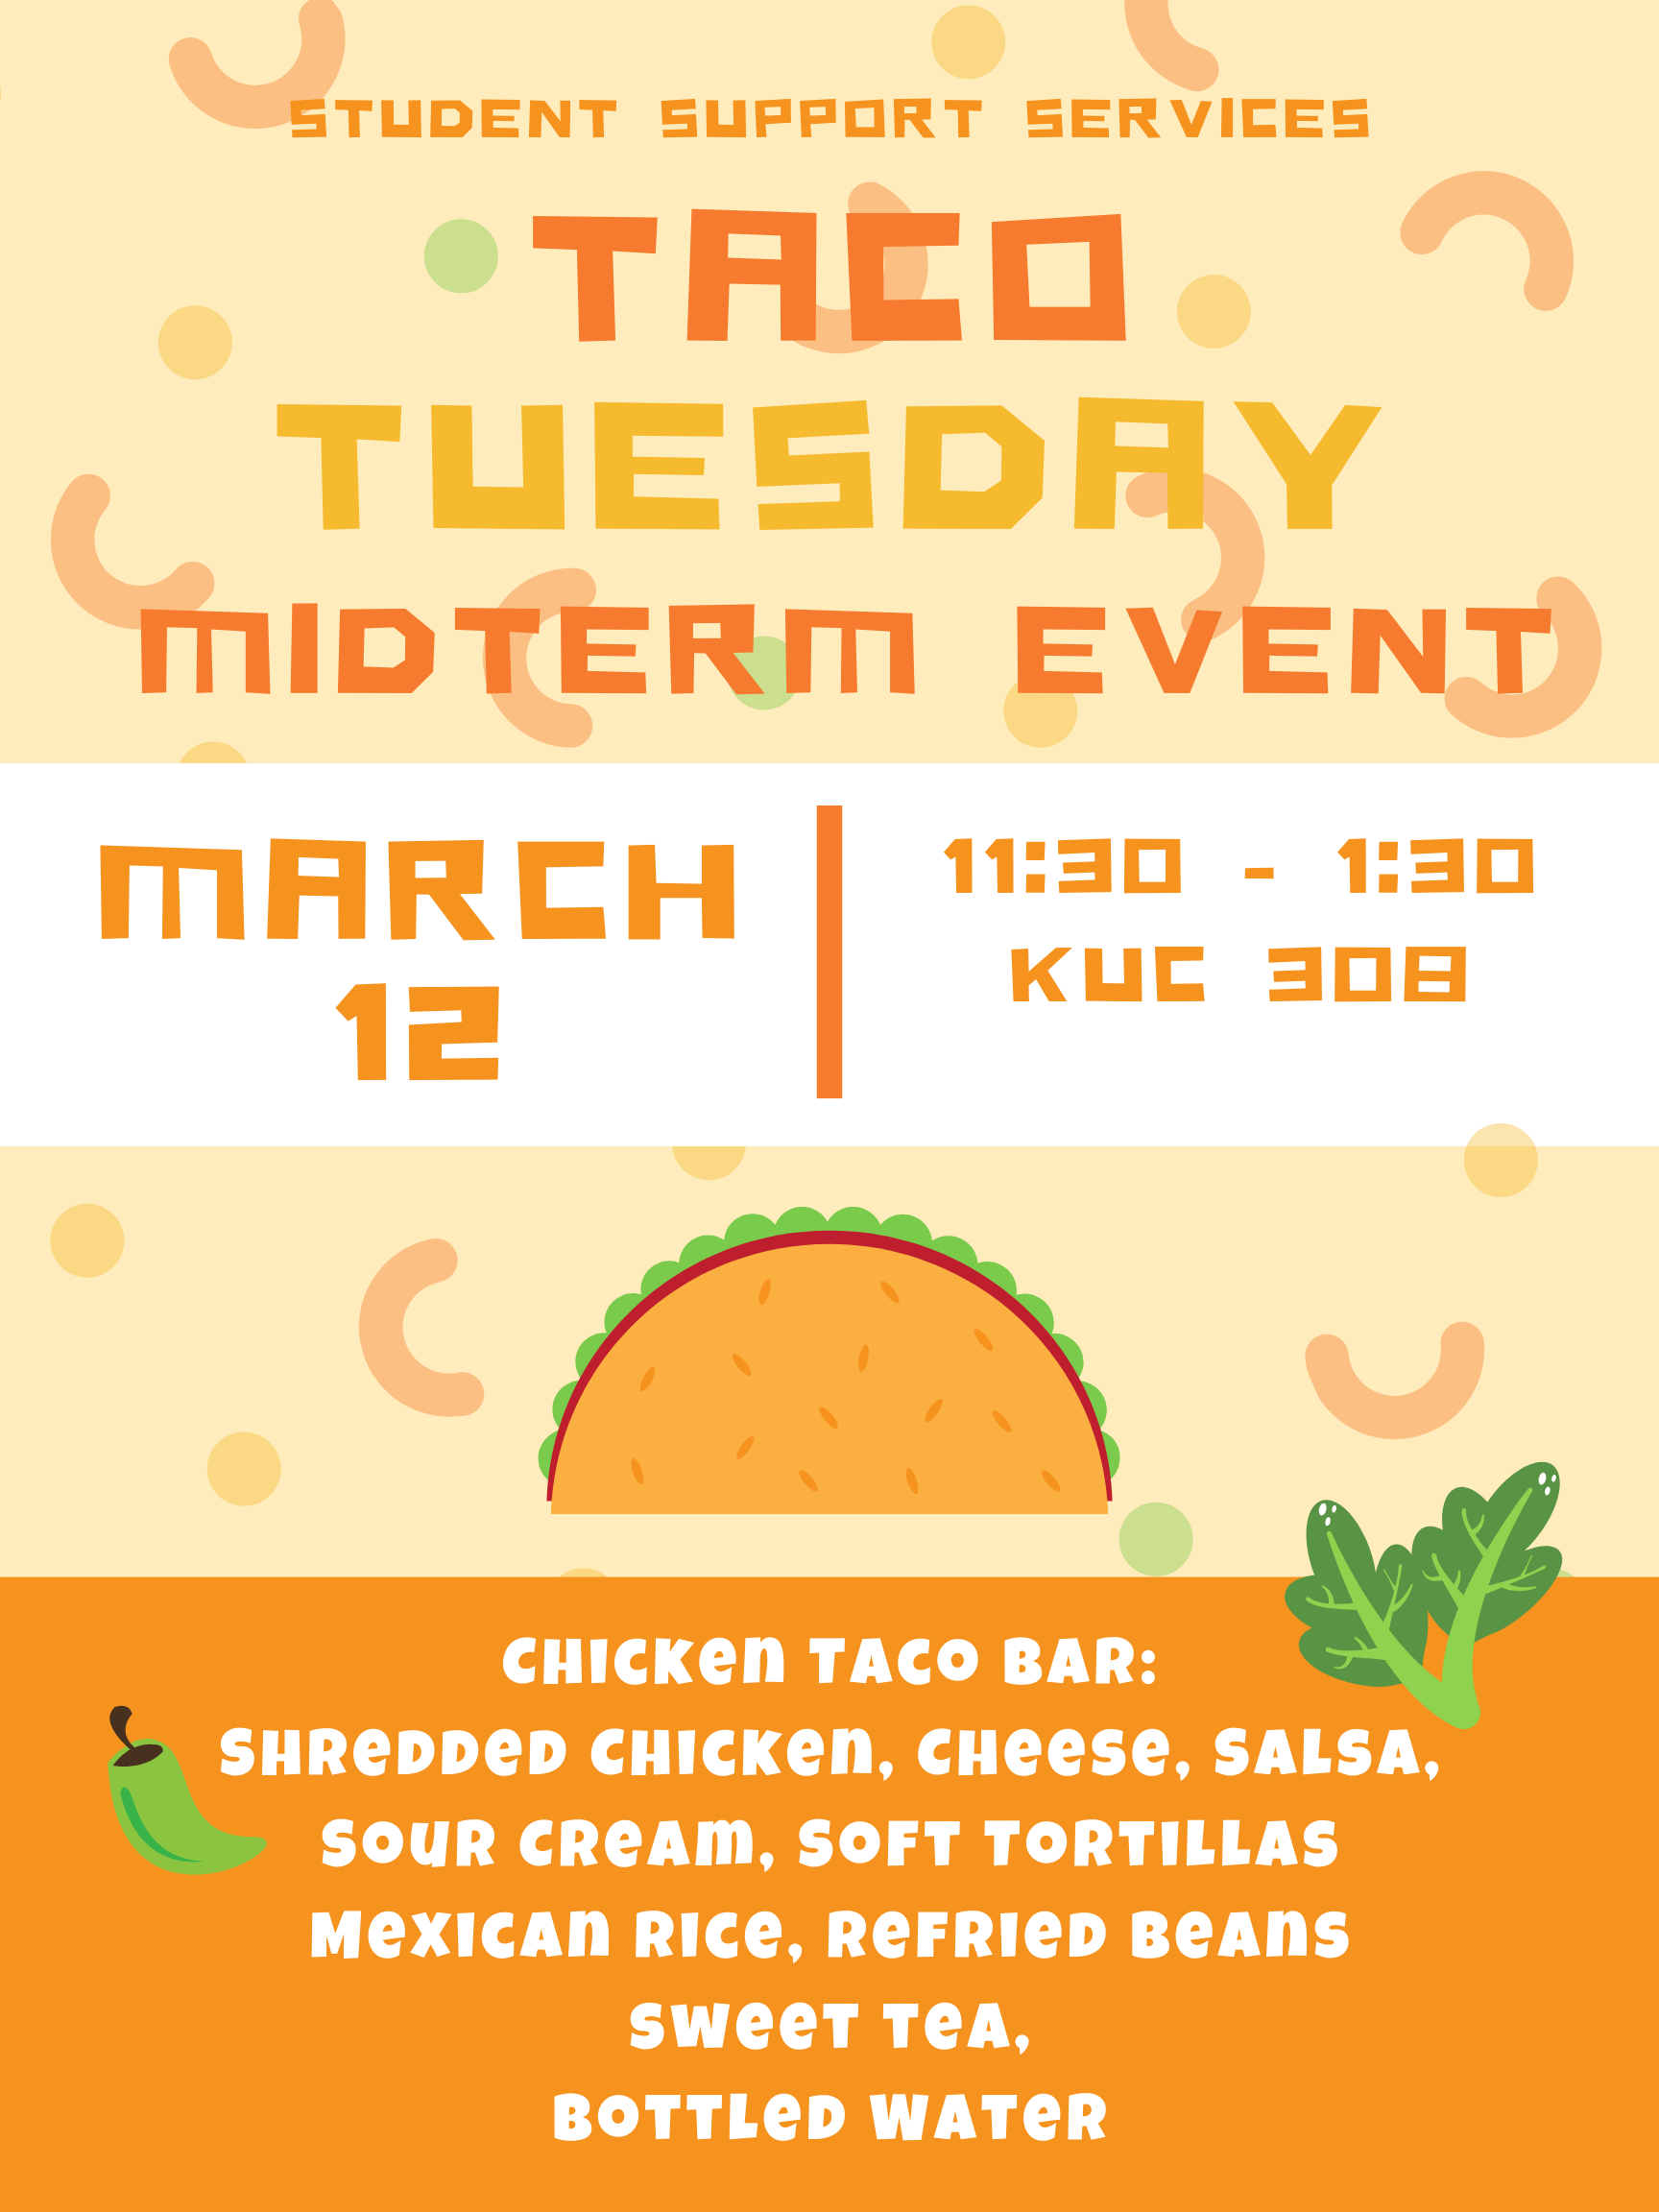 Midterm Review Lunch - March 12th - 11:30a-1:30p - SSS Office